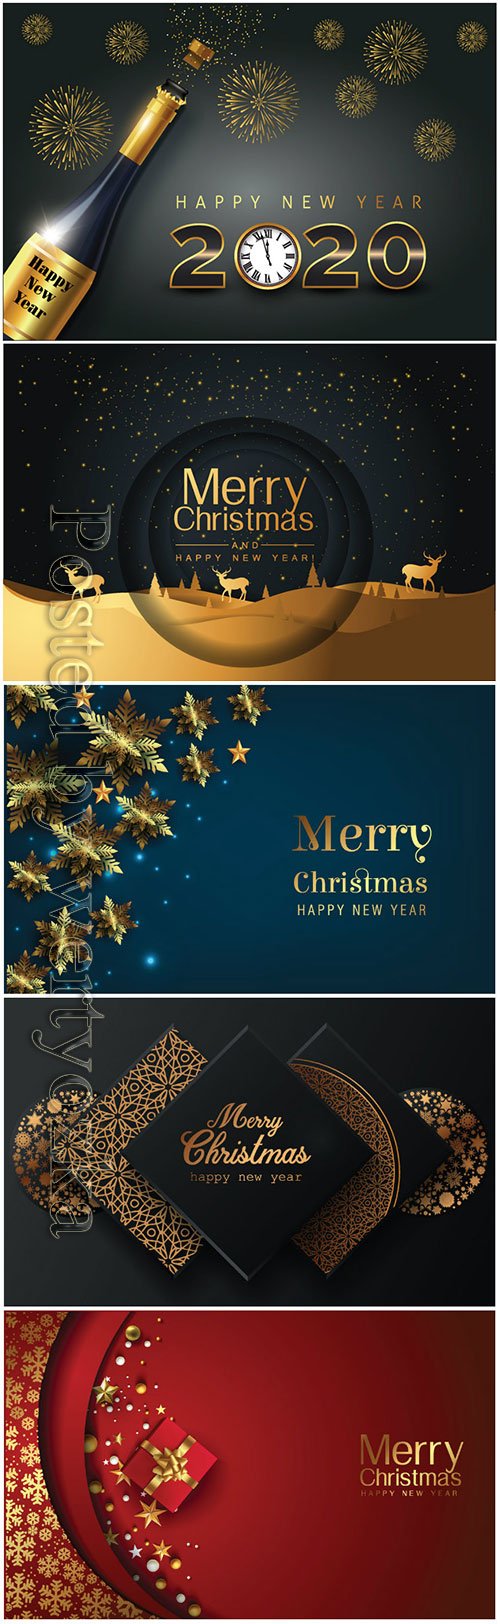 2020 Merry Chistmas and Happy New Year vector illustration # 4